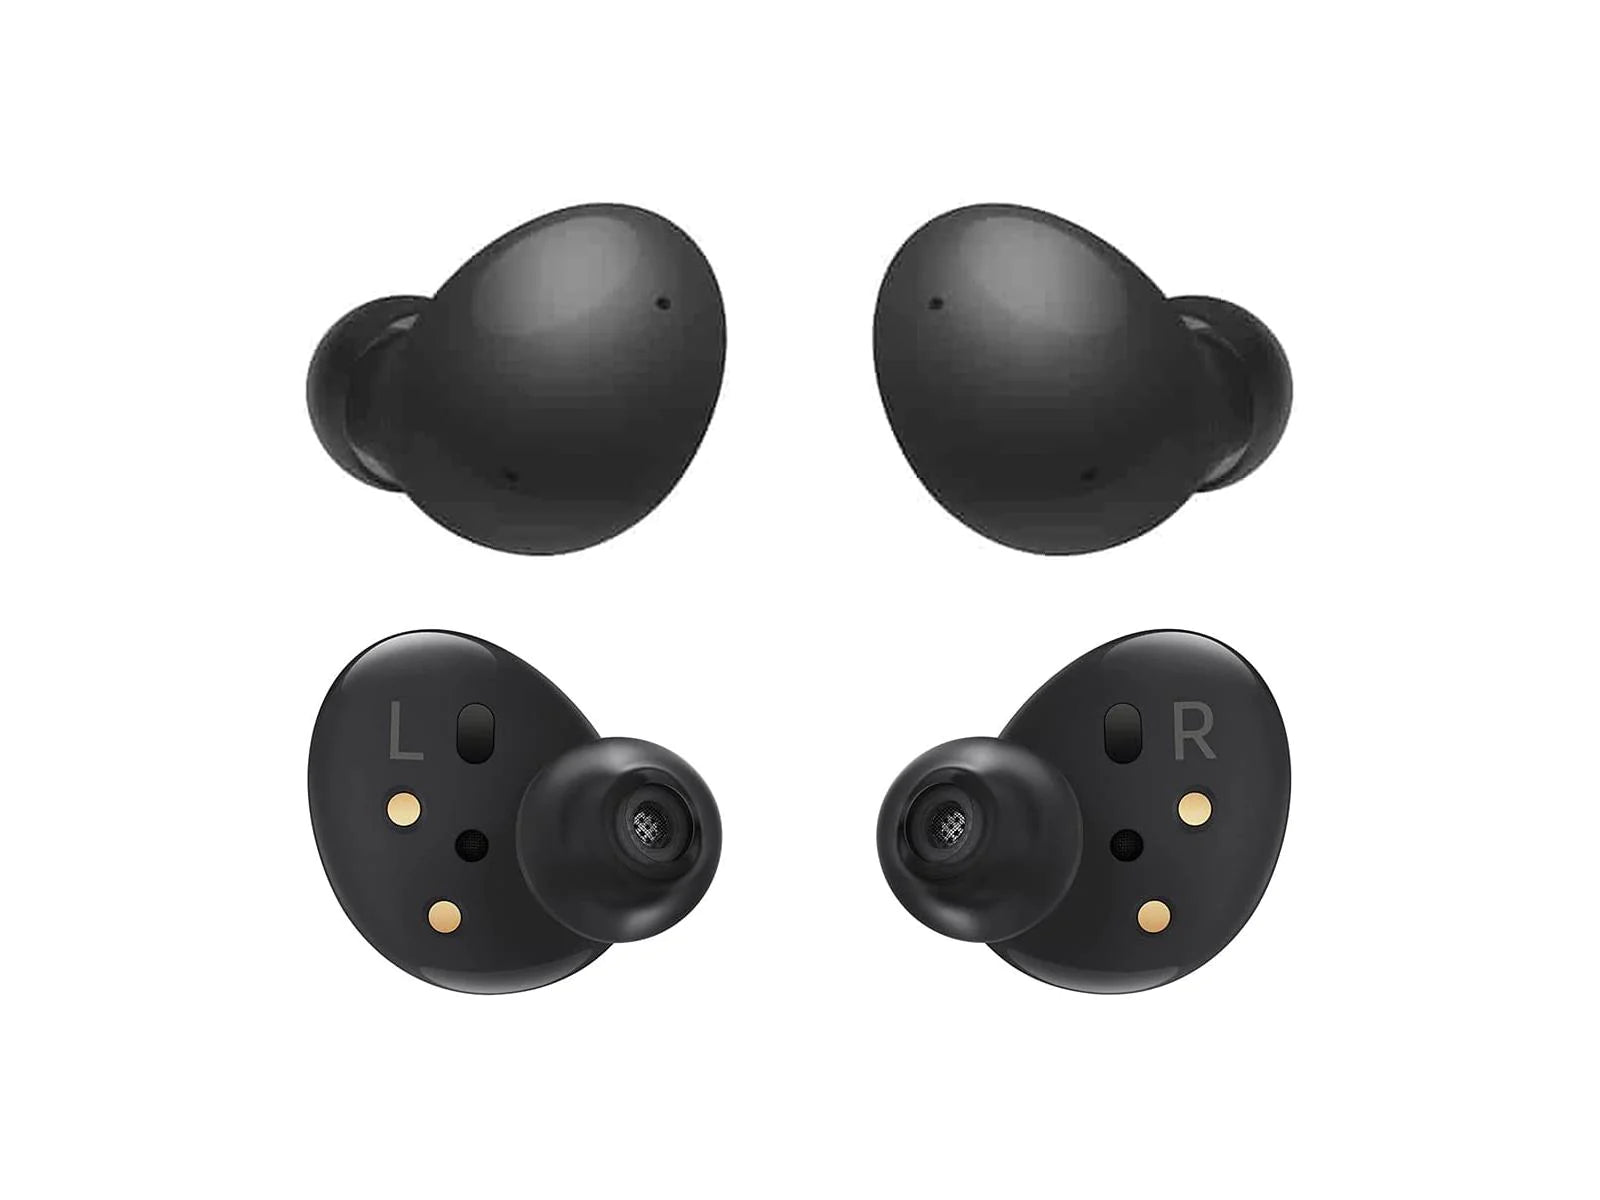 Picture of the black left and right ear pieces in different positions of the Wireless Bluetooth Samsung Galaxy Buds2 on the white background